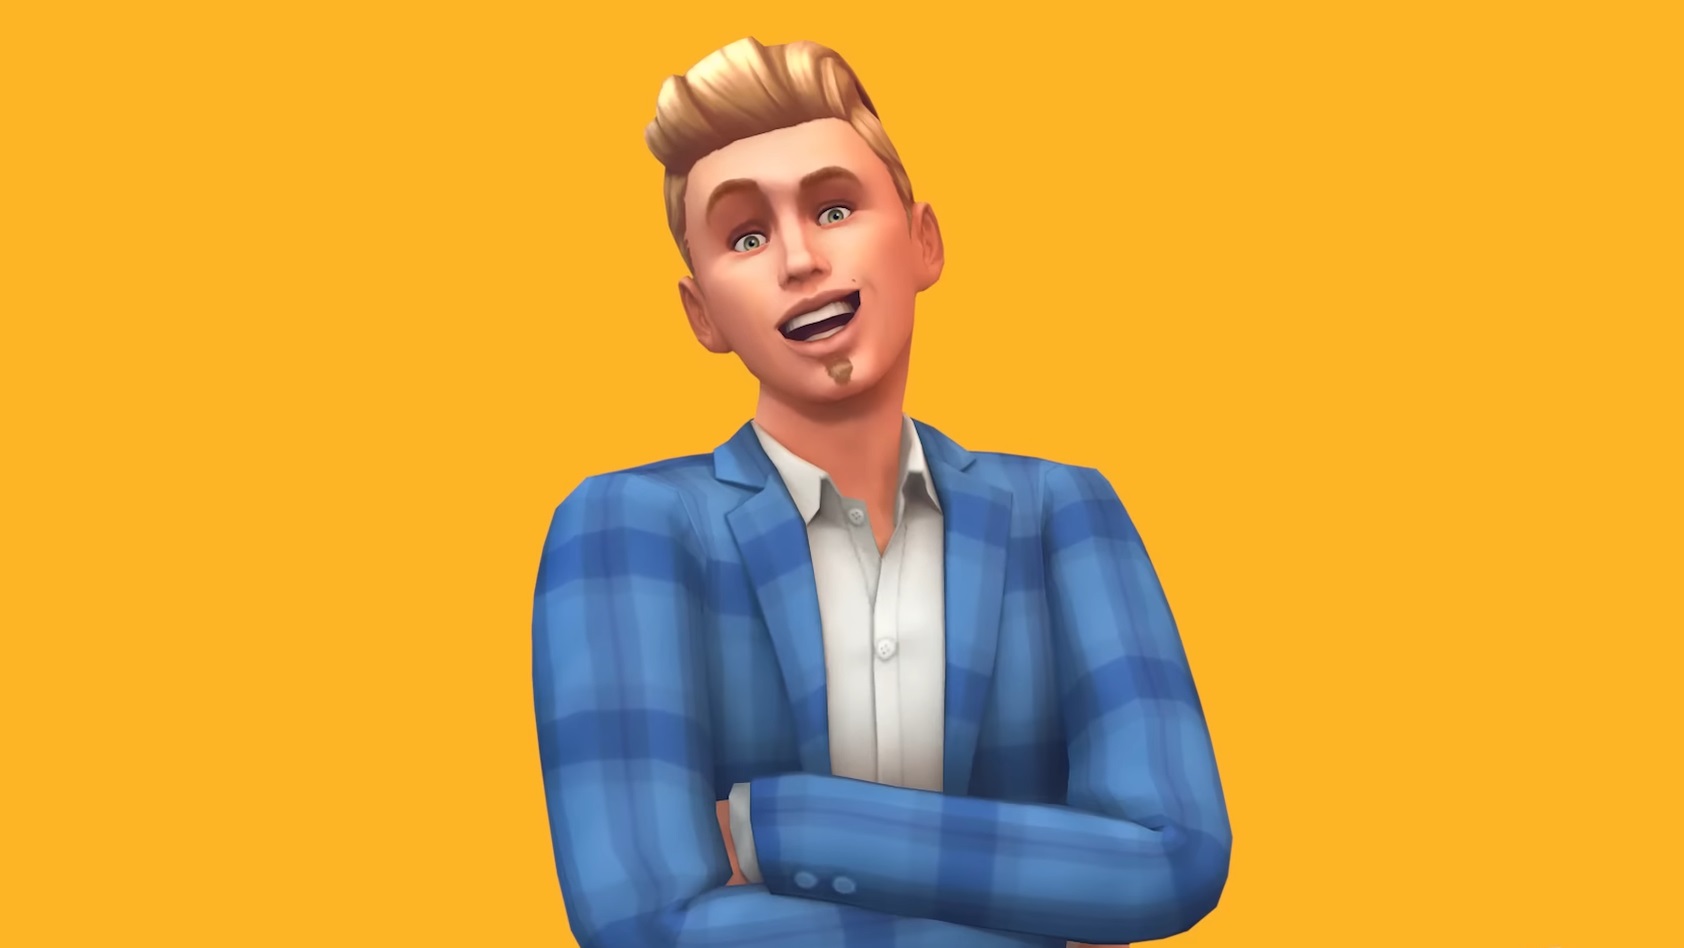  The next Sims game will be free to play without a subscription or energy mechanics, EA confirms 